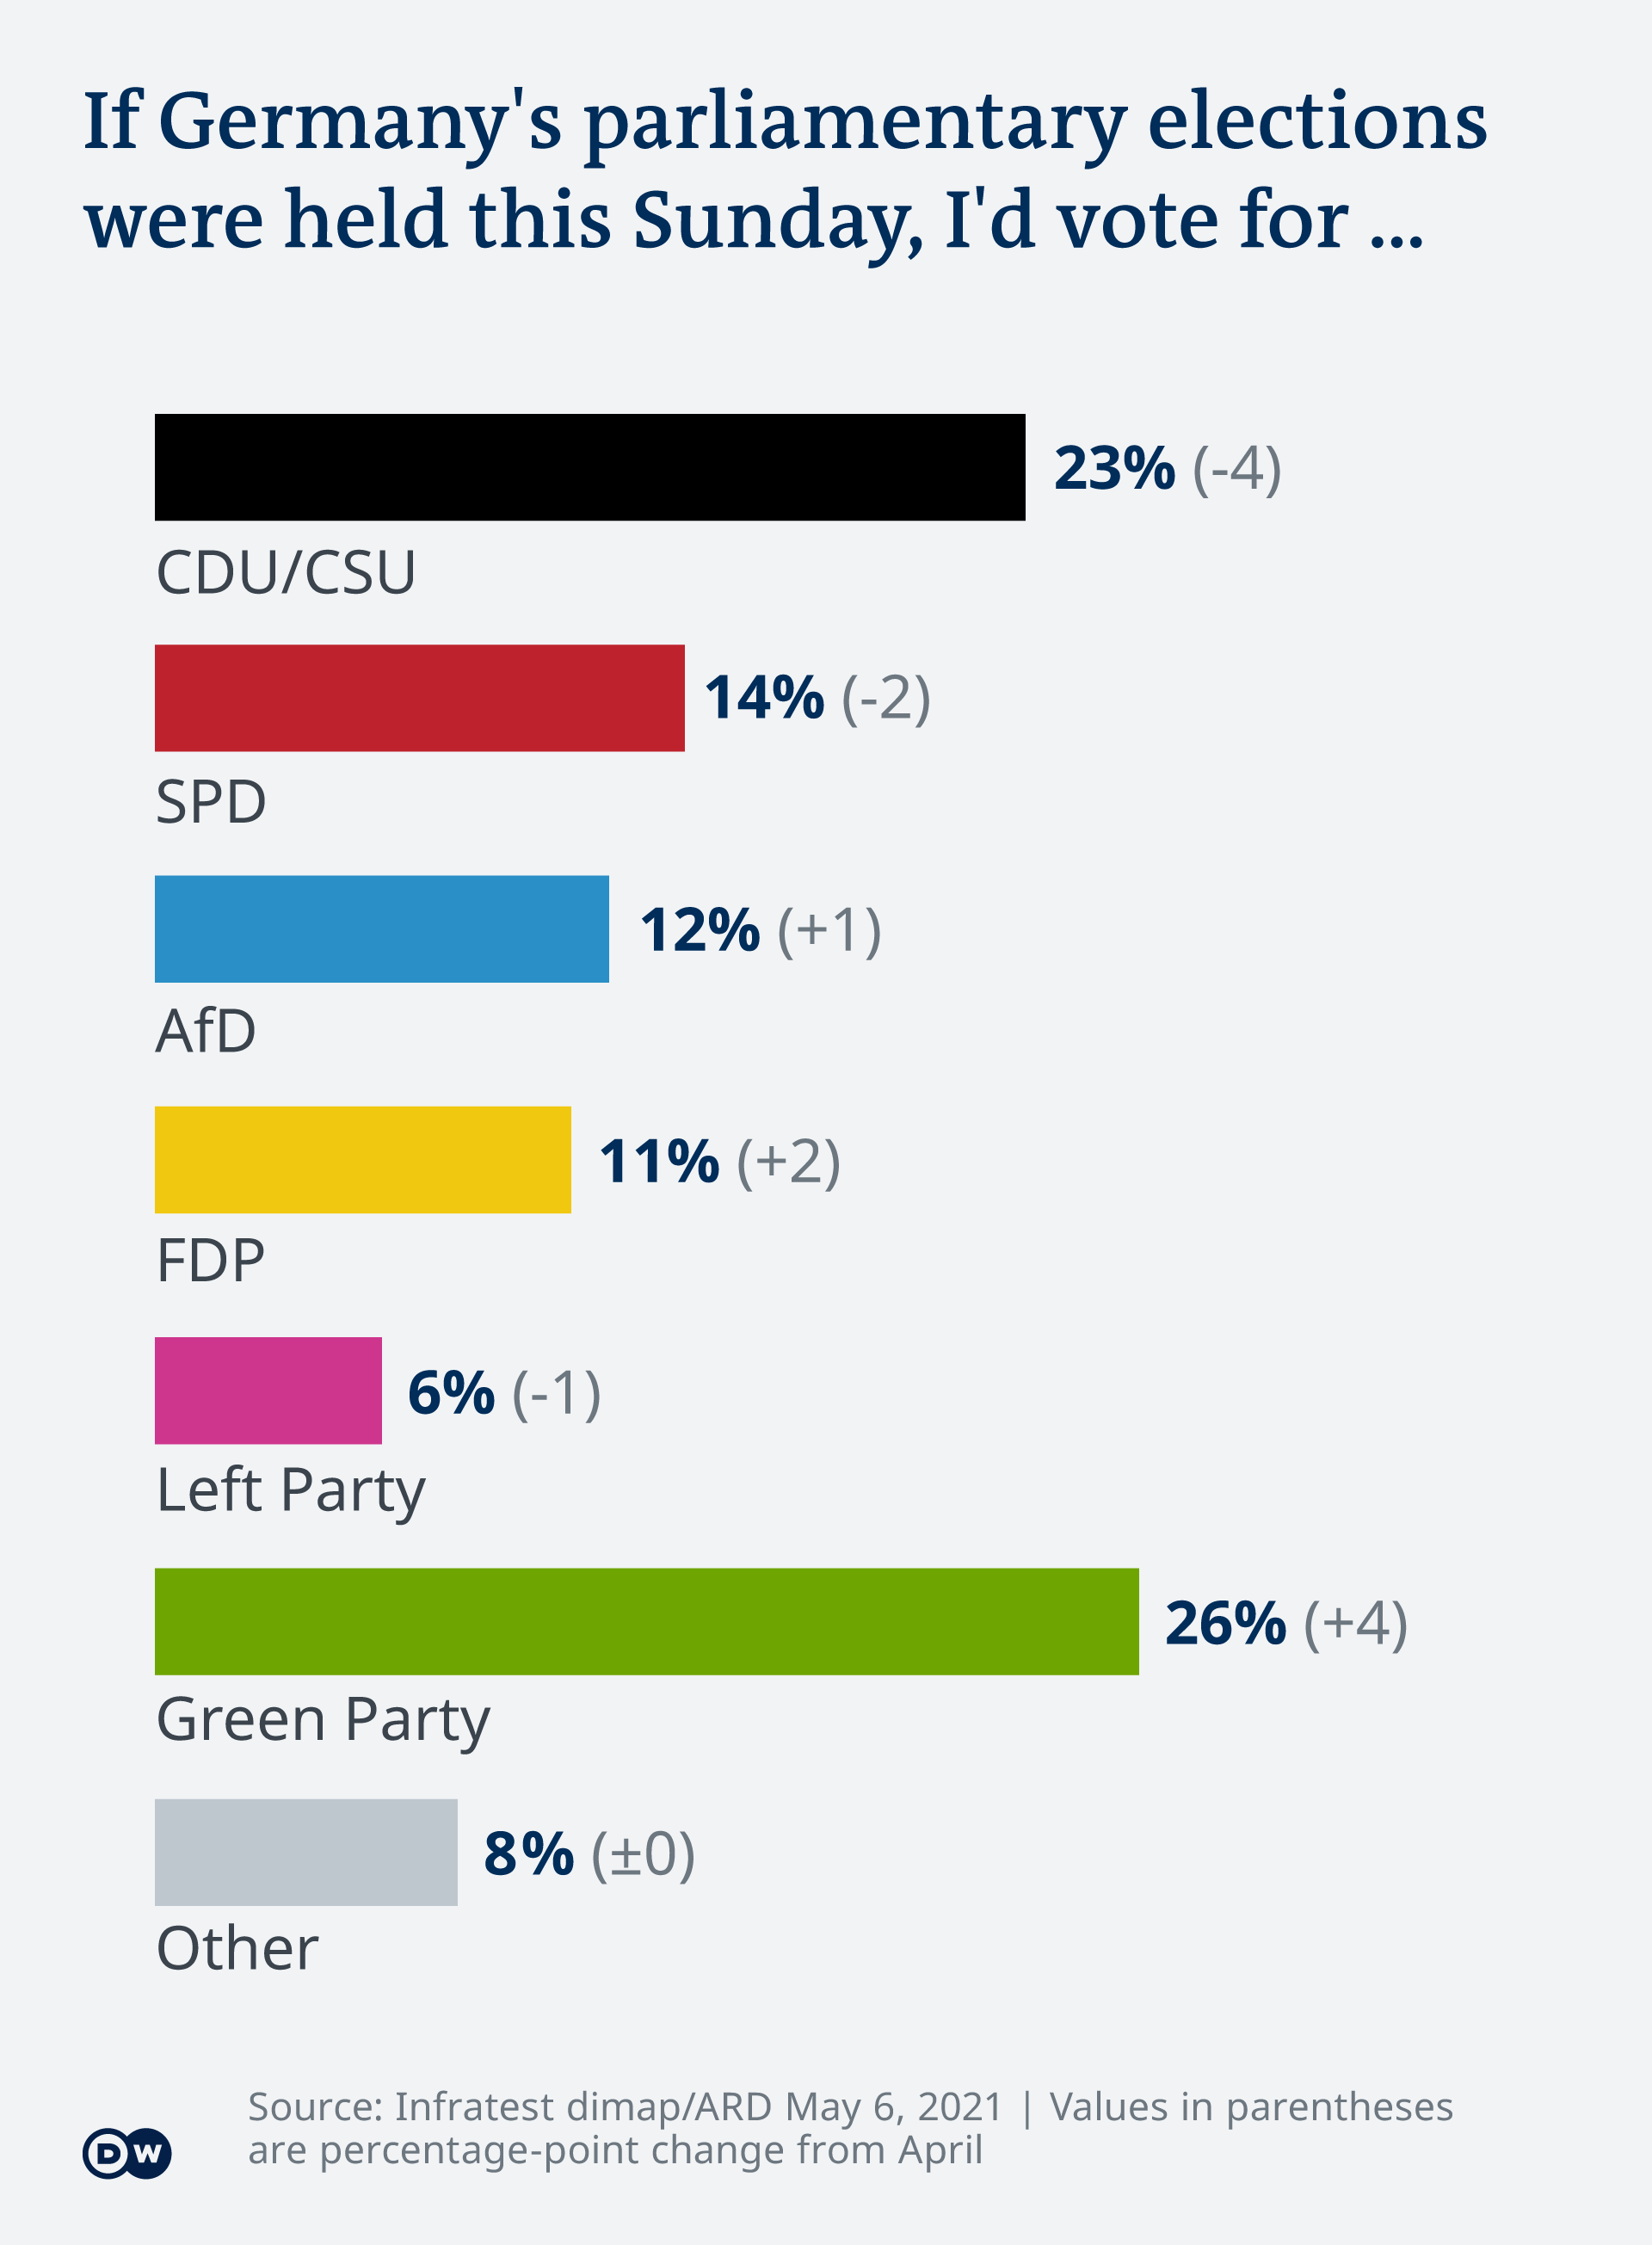 Opinion poll from early May puts the AfD at over 10% of the vote